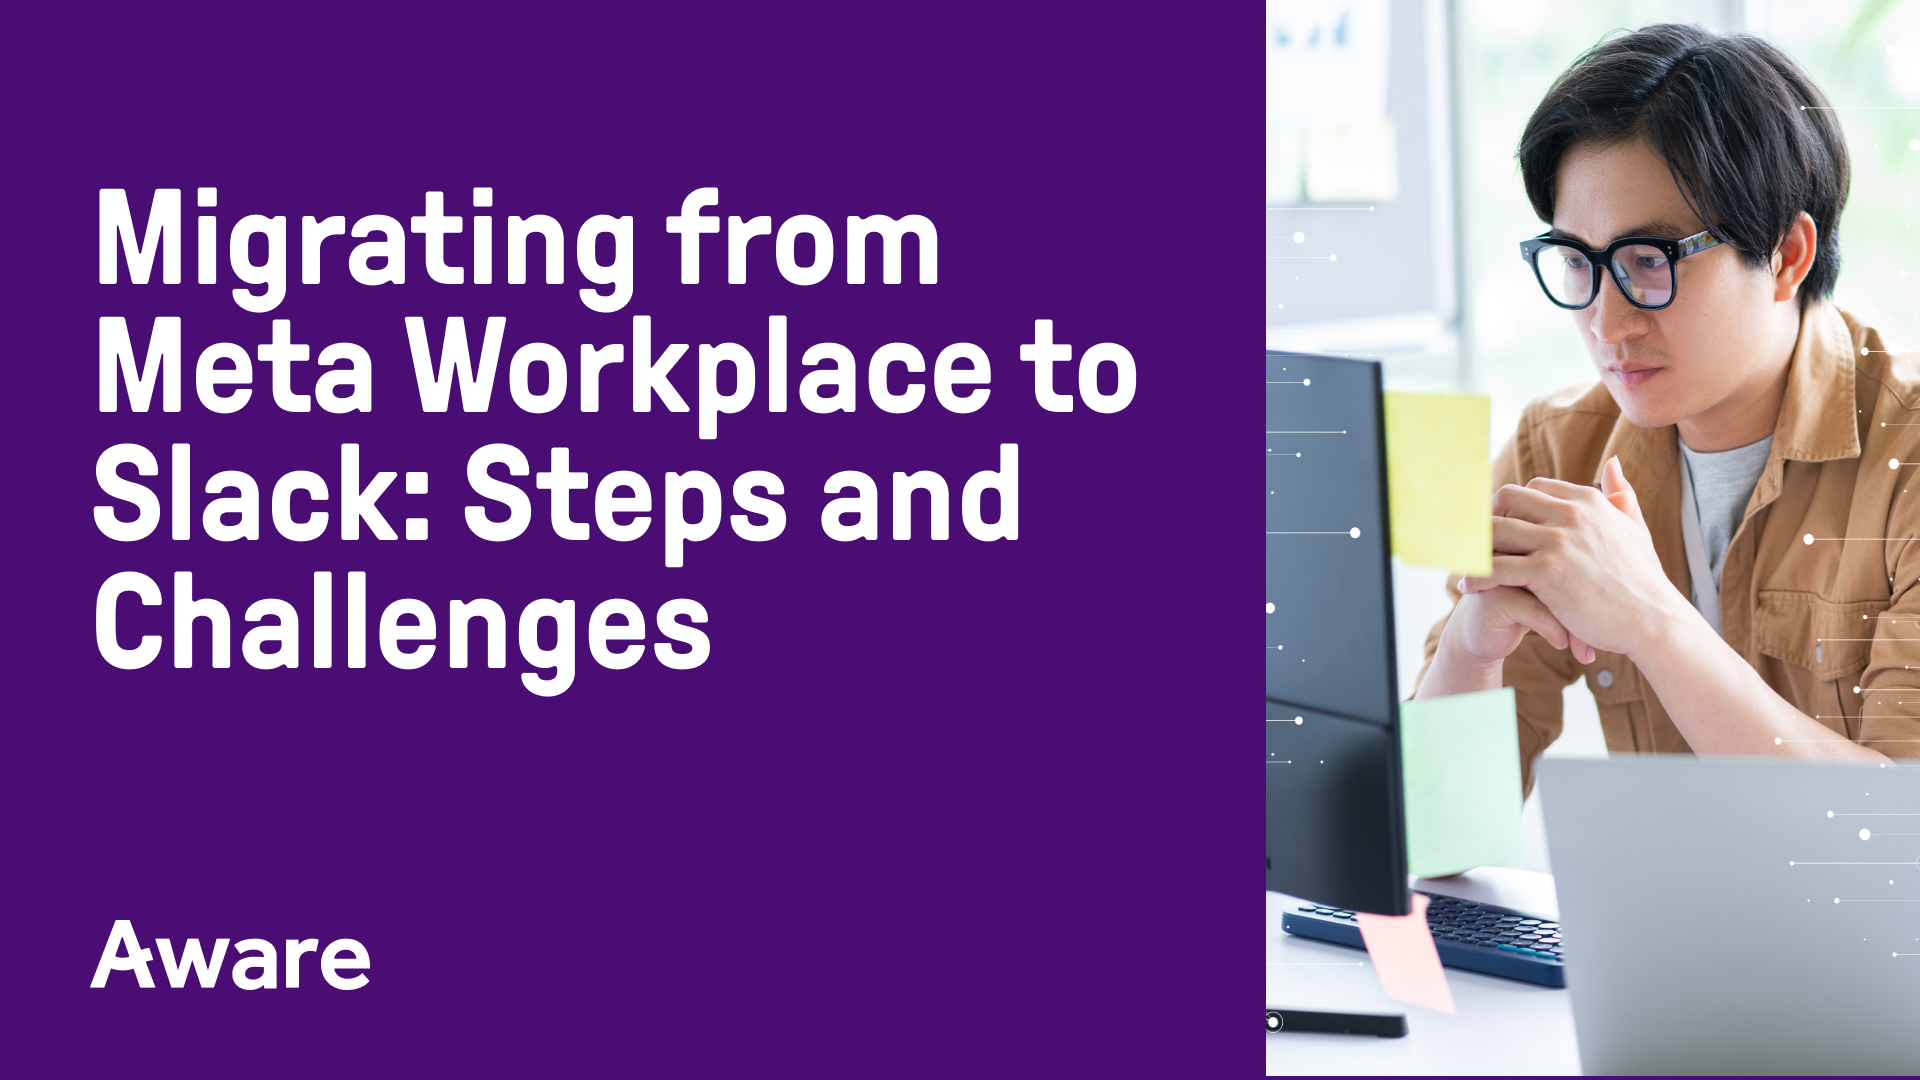 Migrating from Meta Workplace to Slack: Steps and Challenges